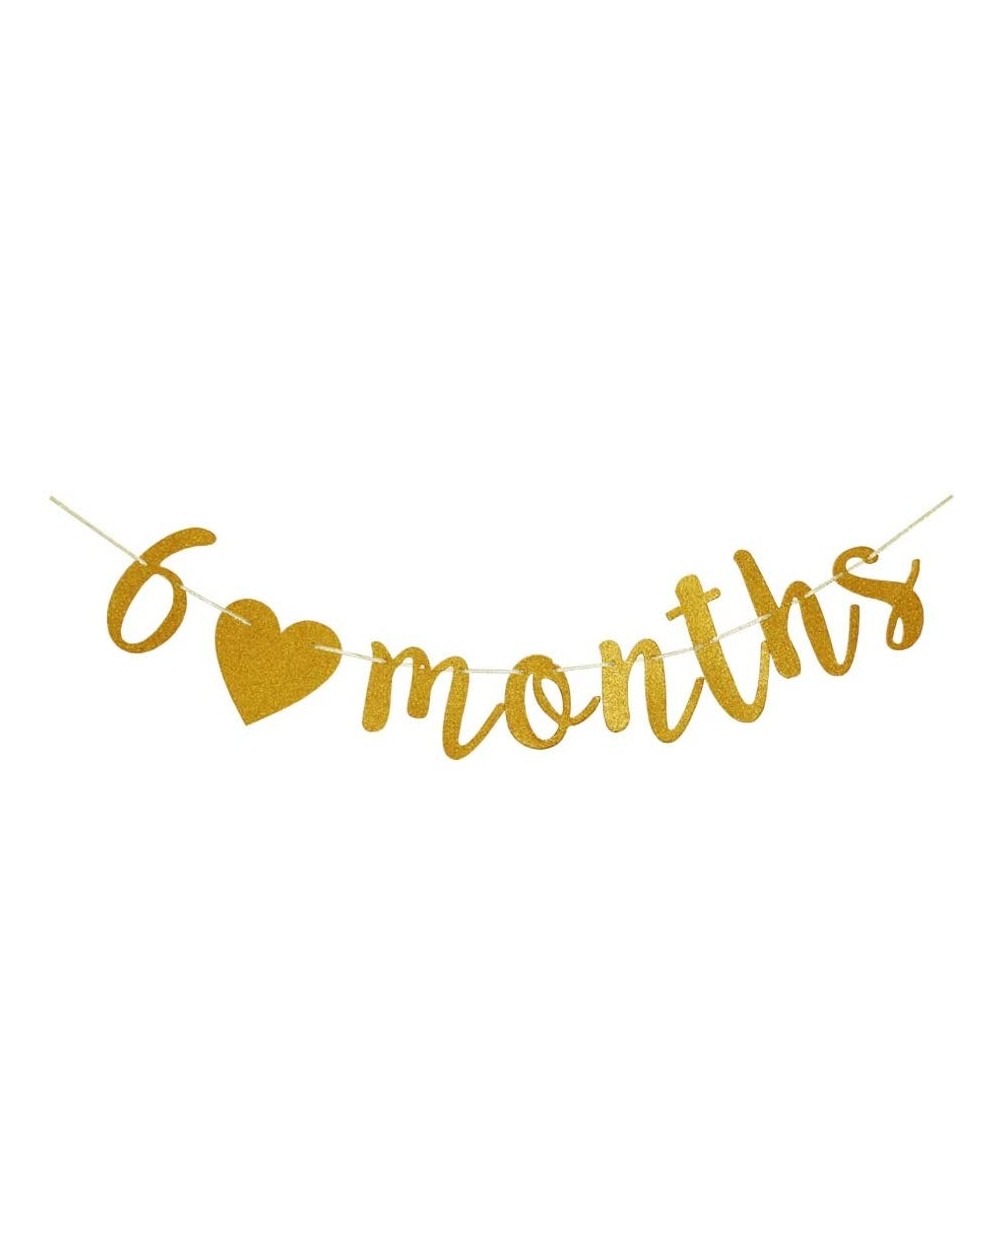 Banners & Garlands 6 Months Banner- Gold Glitter Sign Garlands for Baby Shower Party Decors- Baby Boy's/Girl's 1/2 Birthday P...